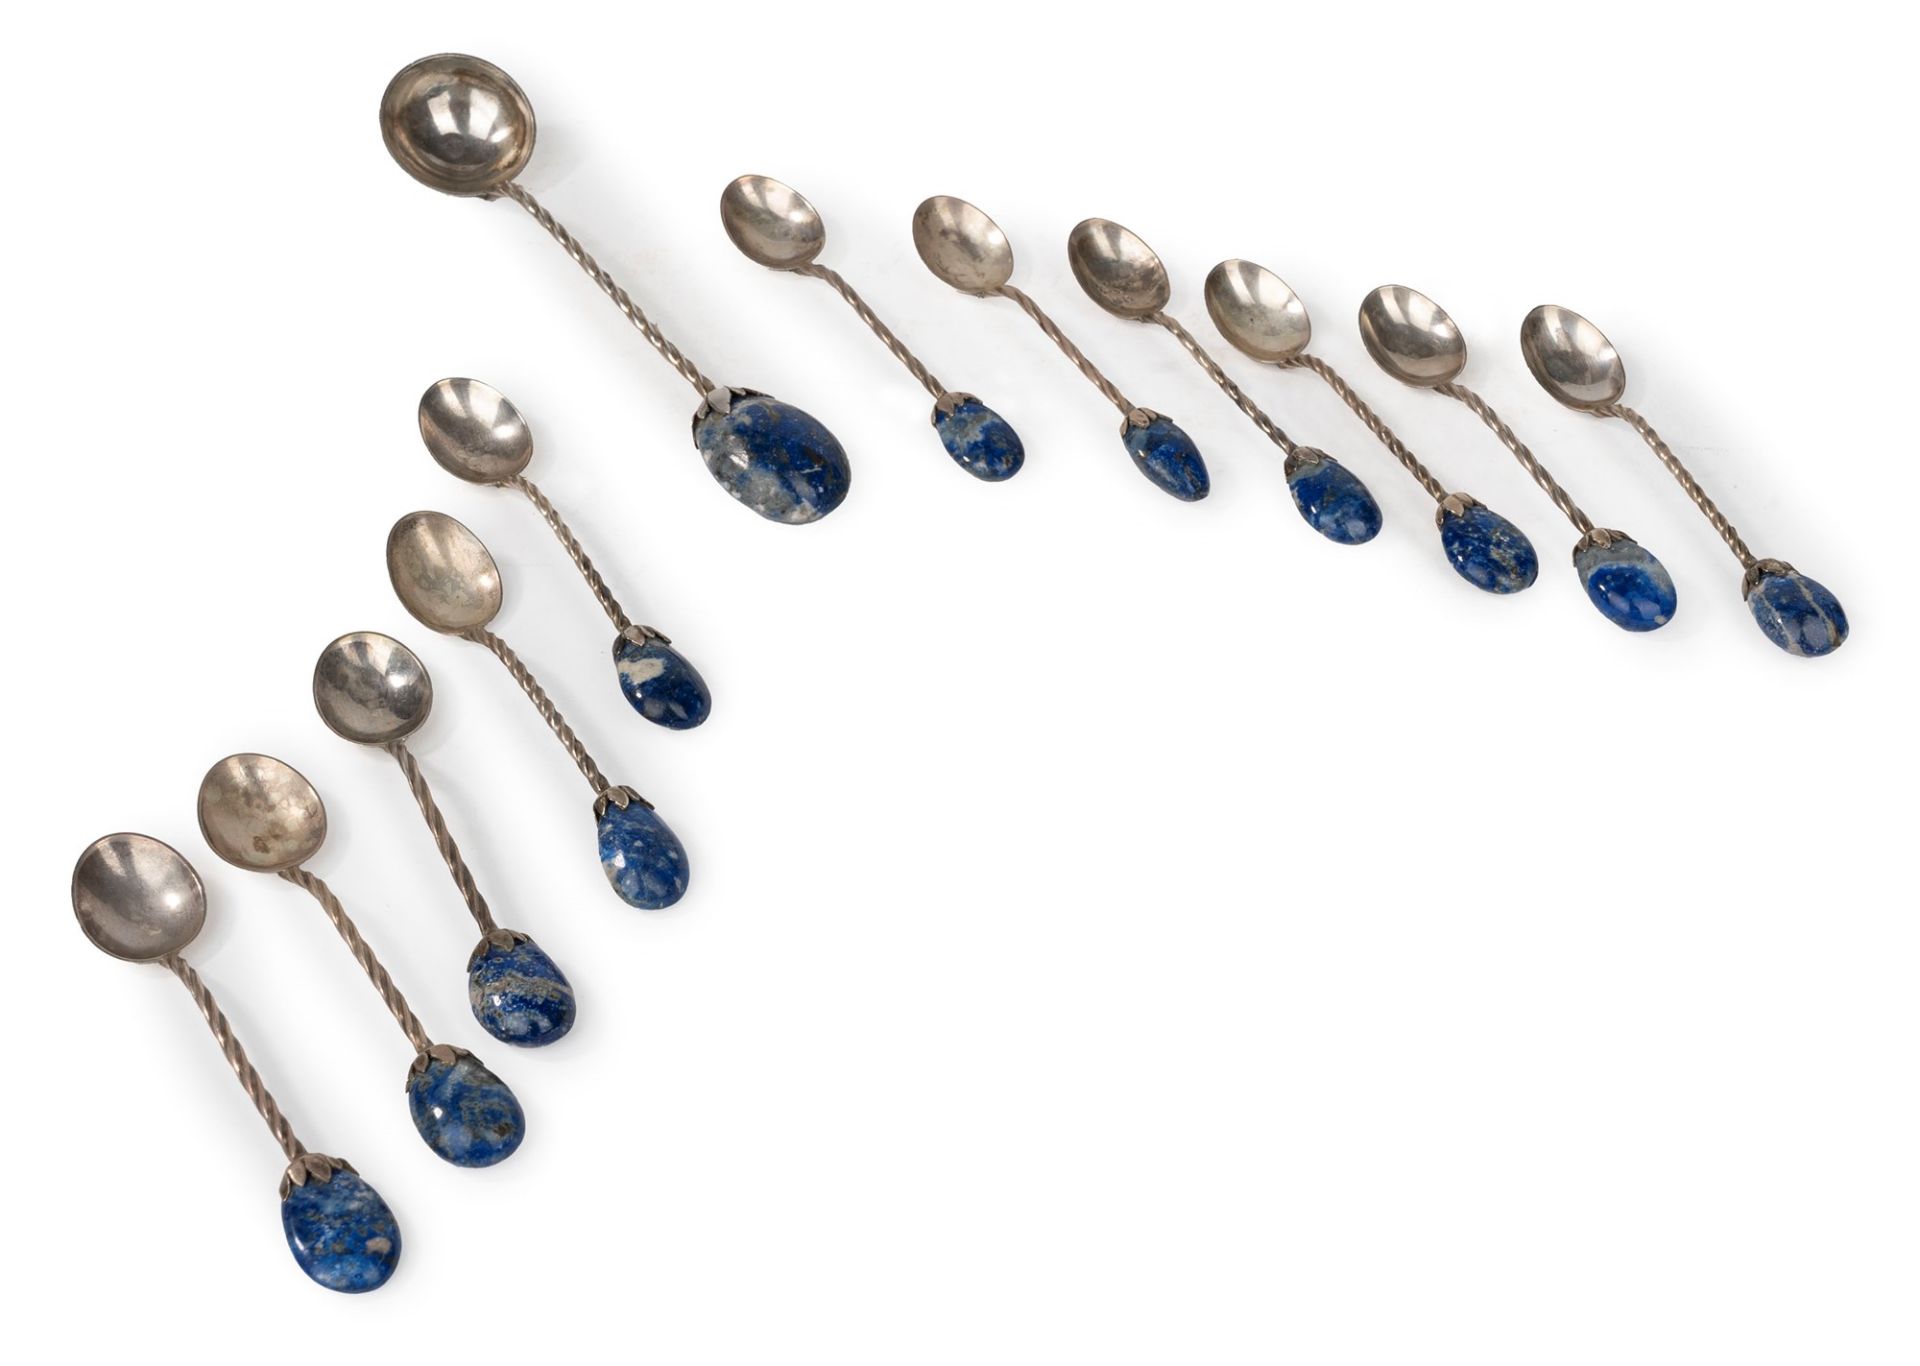 Eleven teaspoons and a small ladle in silver and lapis lazuli, 17th century